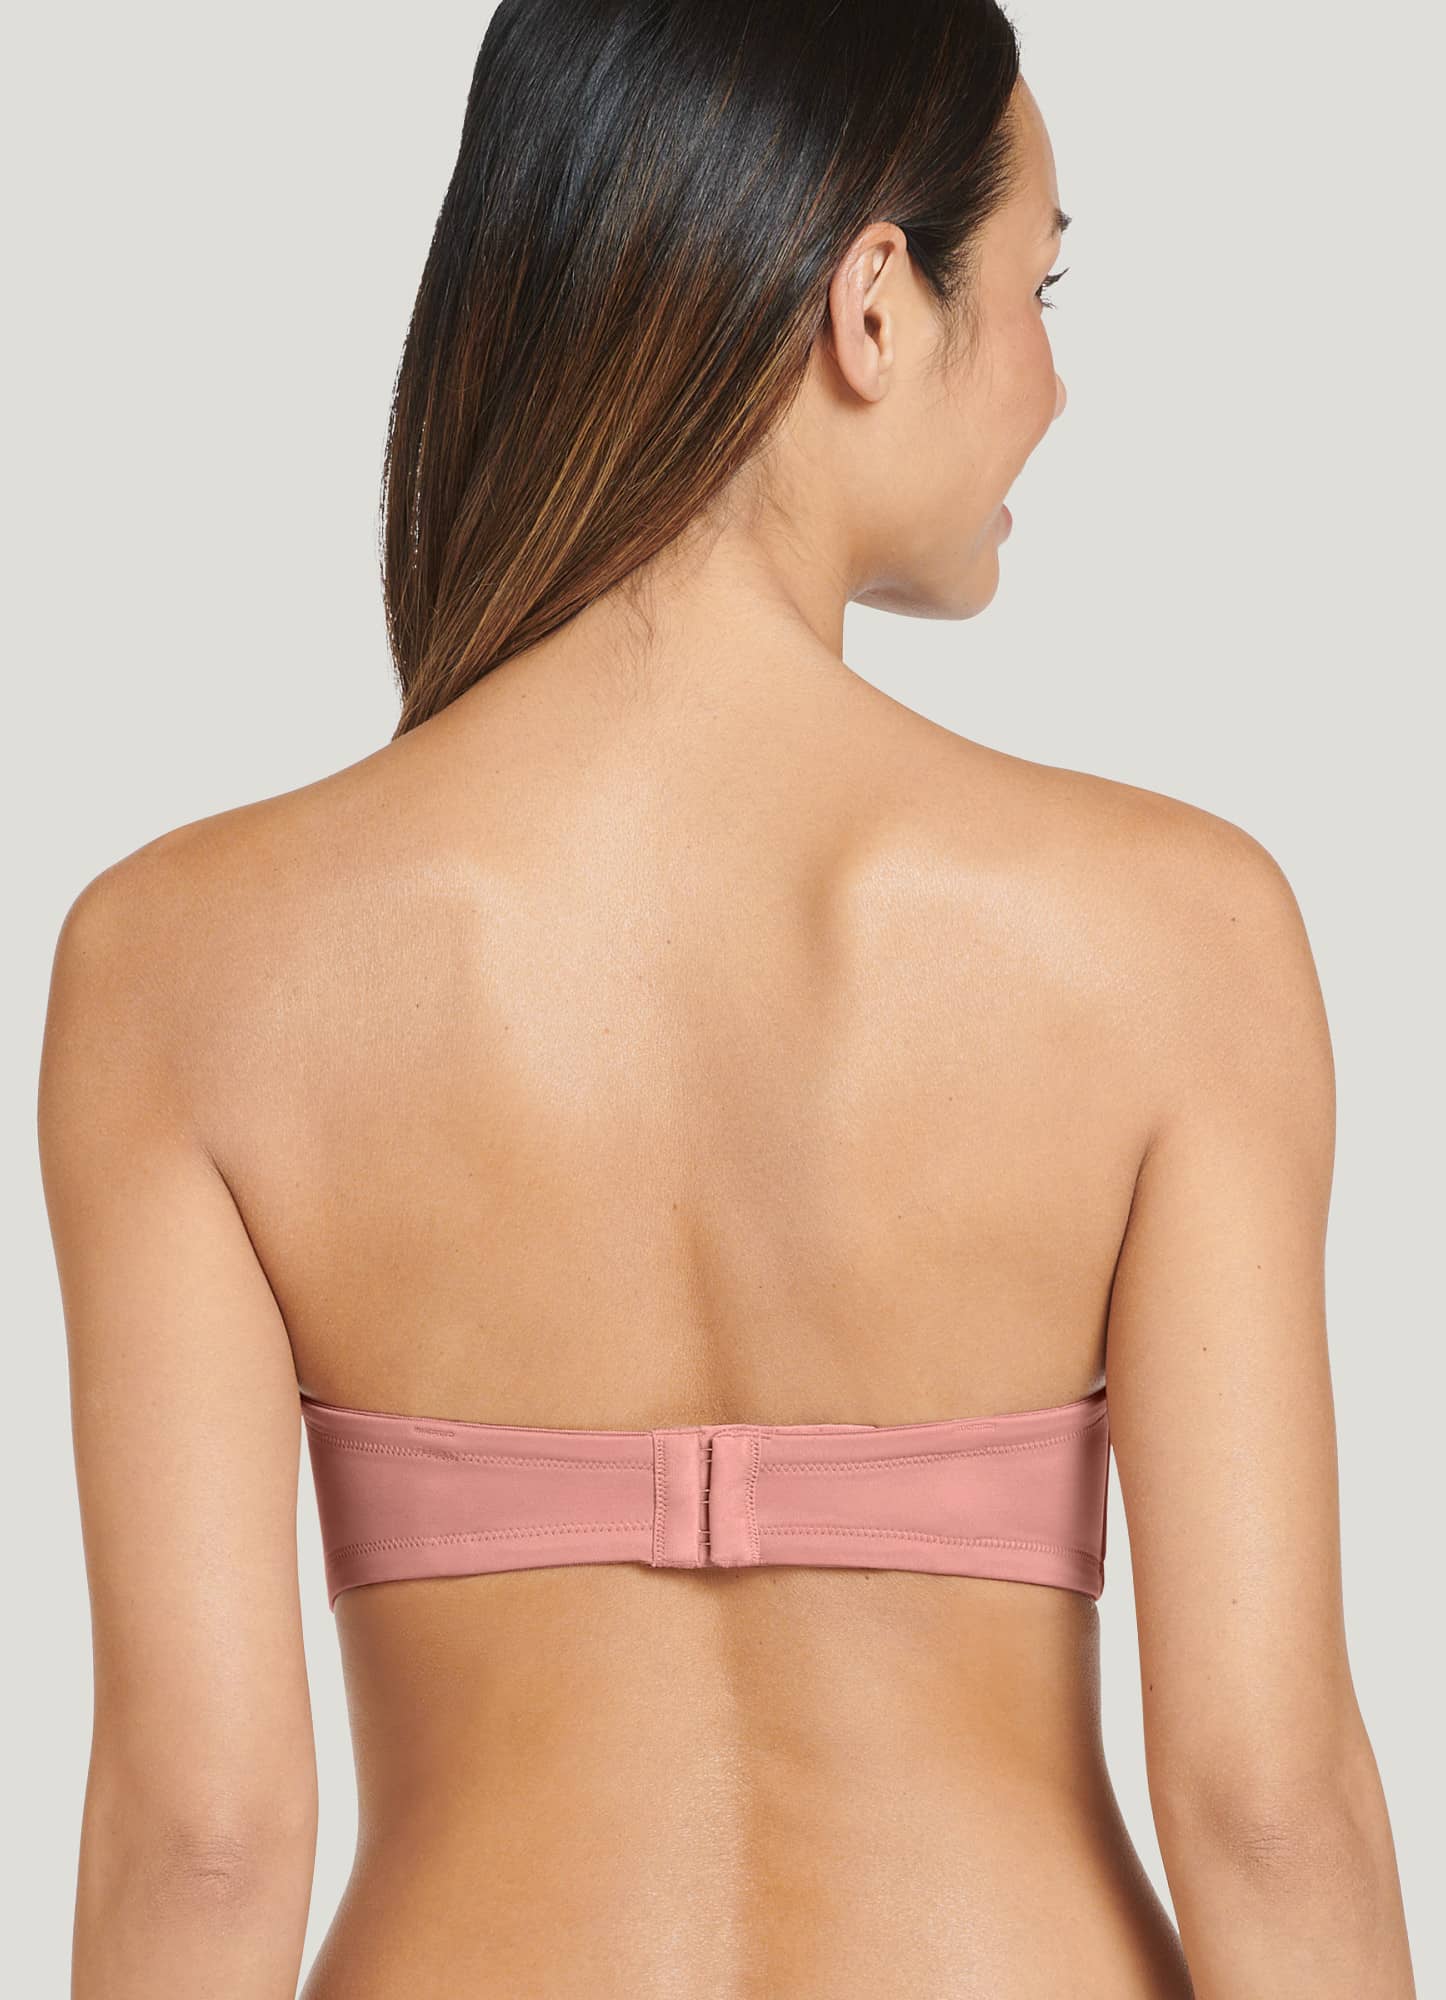 Definitions Strapless Bra, Natural